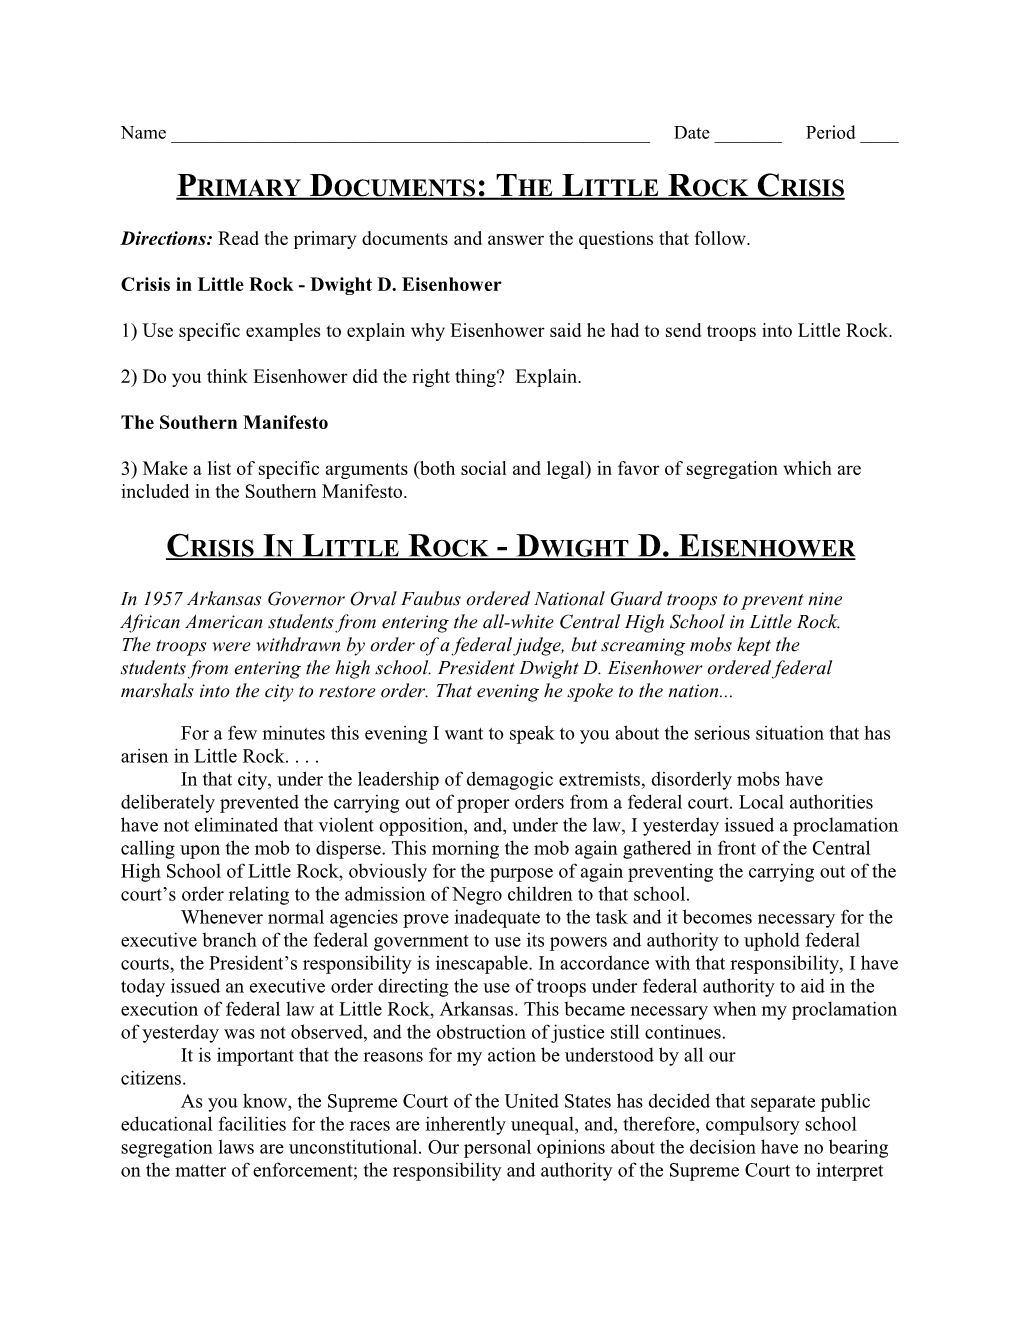 Primary Documents: the Little Rock Crisis